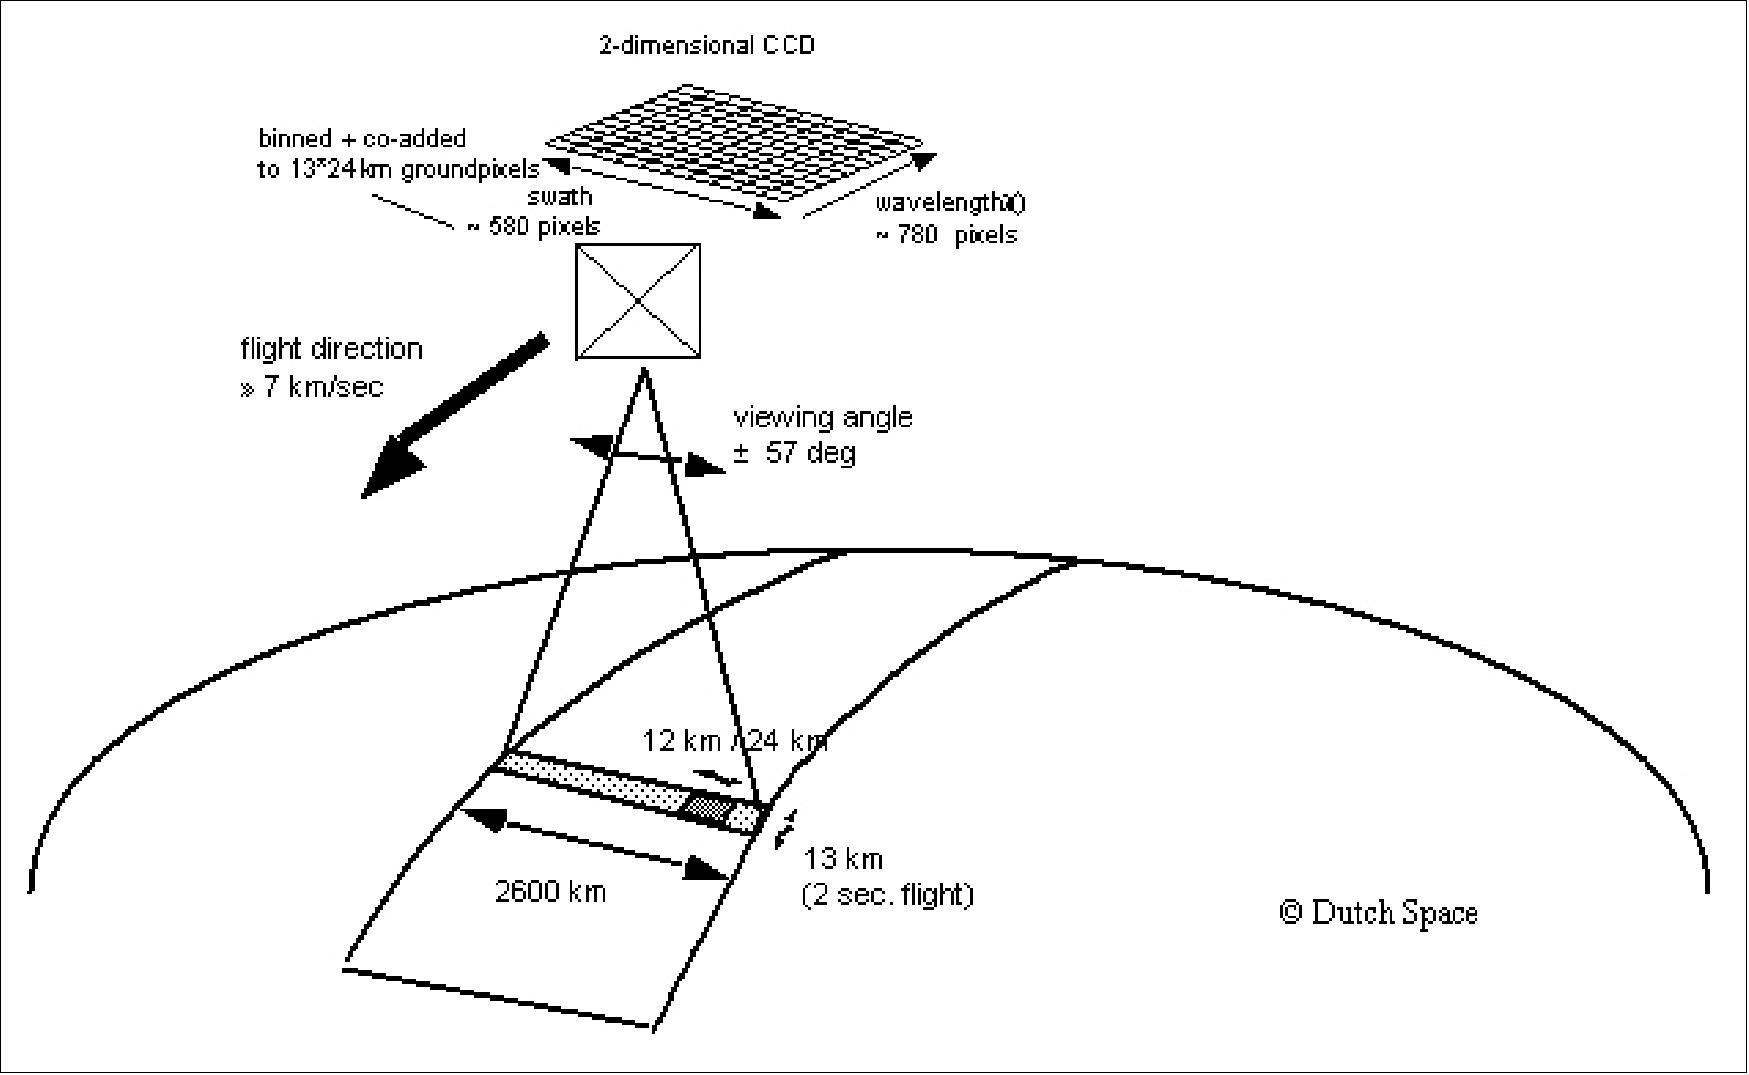 Figure 64: Schematic of measurement principle of the OMI instrument (image credit: Dutch Space)